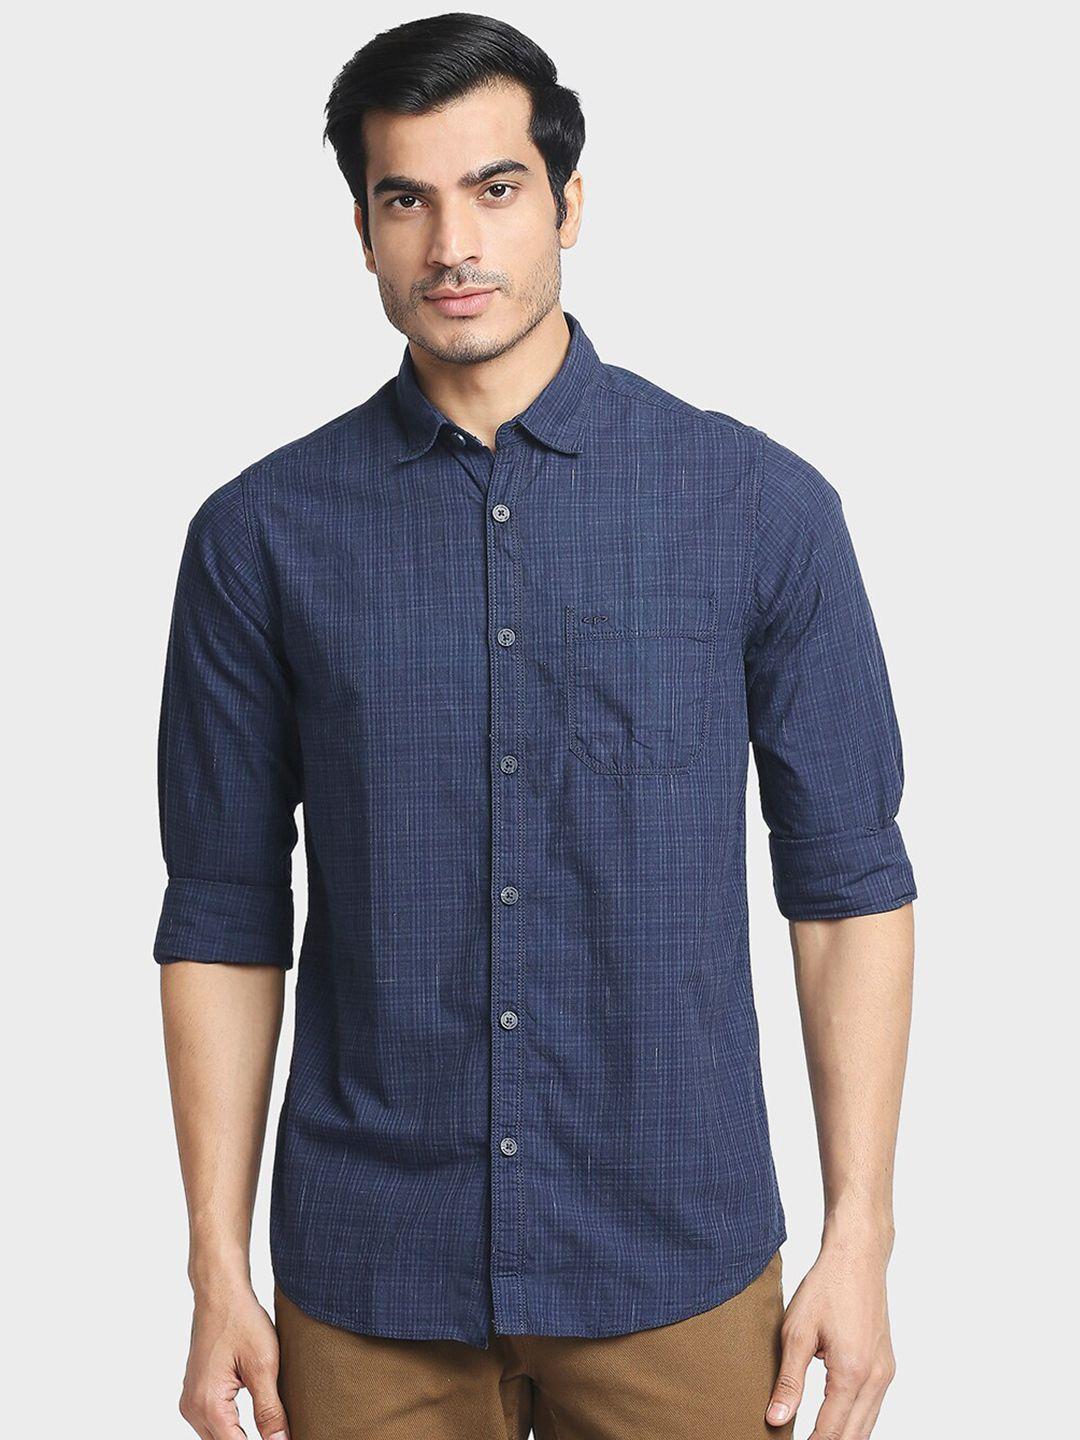 colorplus-men-blue-checked-casual-shirt